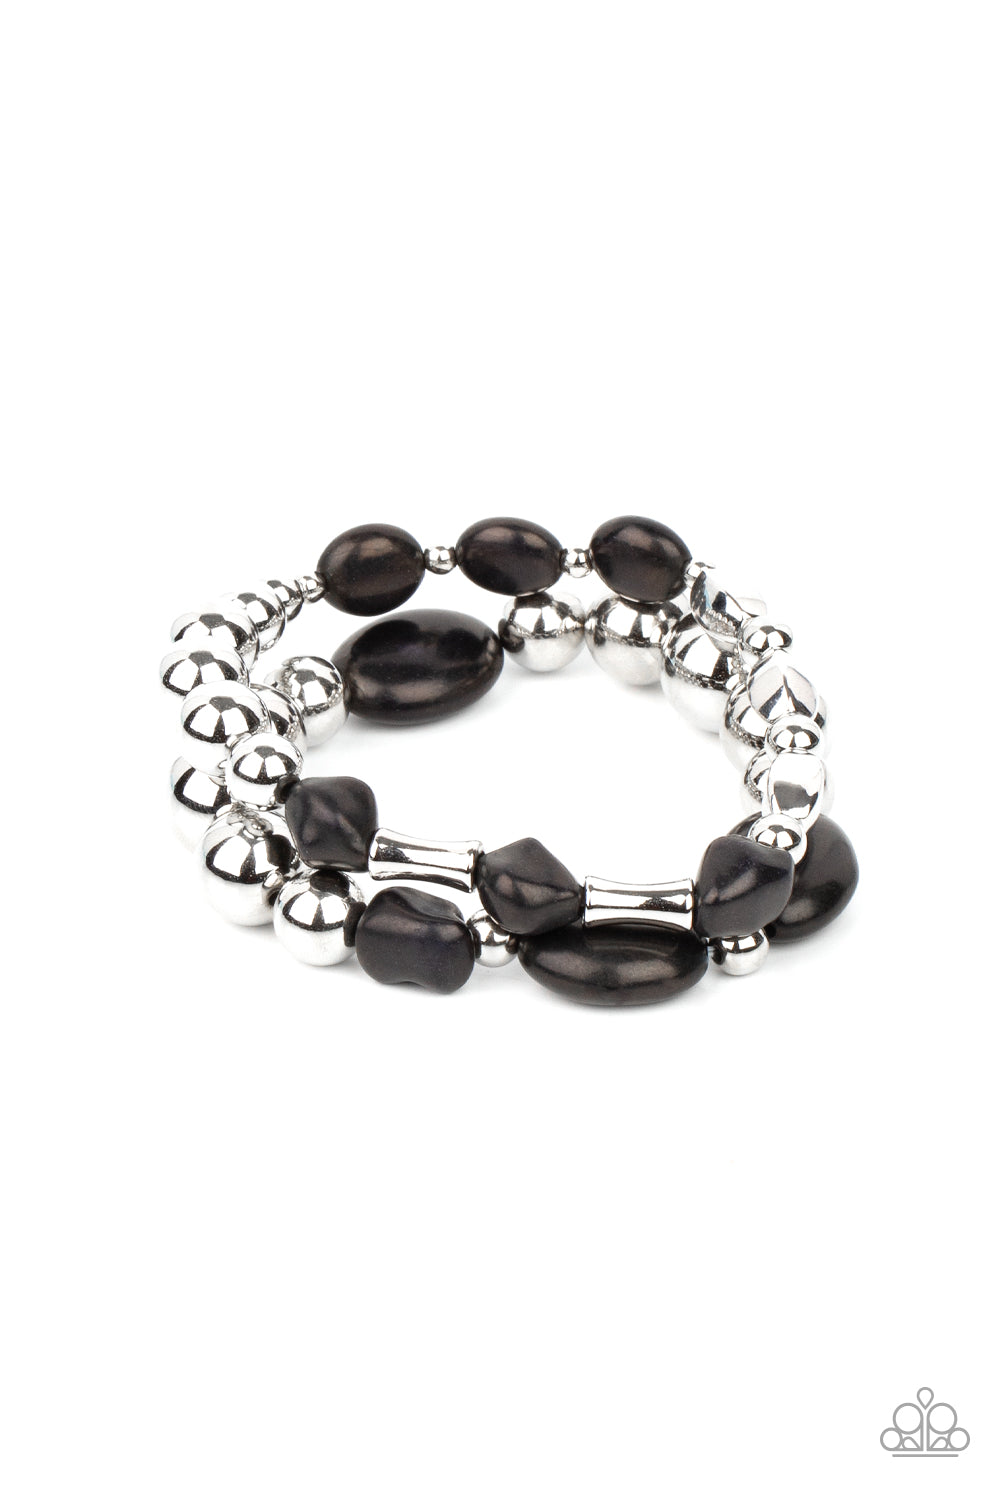 Authentically Artisan Black Bracelet - Paparazzi Accessories. Mismatched black stones and oversized silver beads are threaded along stretchy bands around the wrist, creating earthy layers.  All Paparazzi Accessories are lead free and nickel free!  Sold as one pair of bracelets.